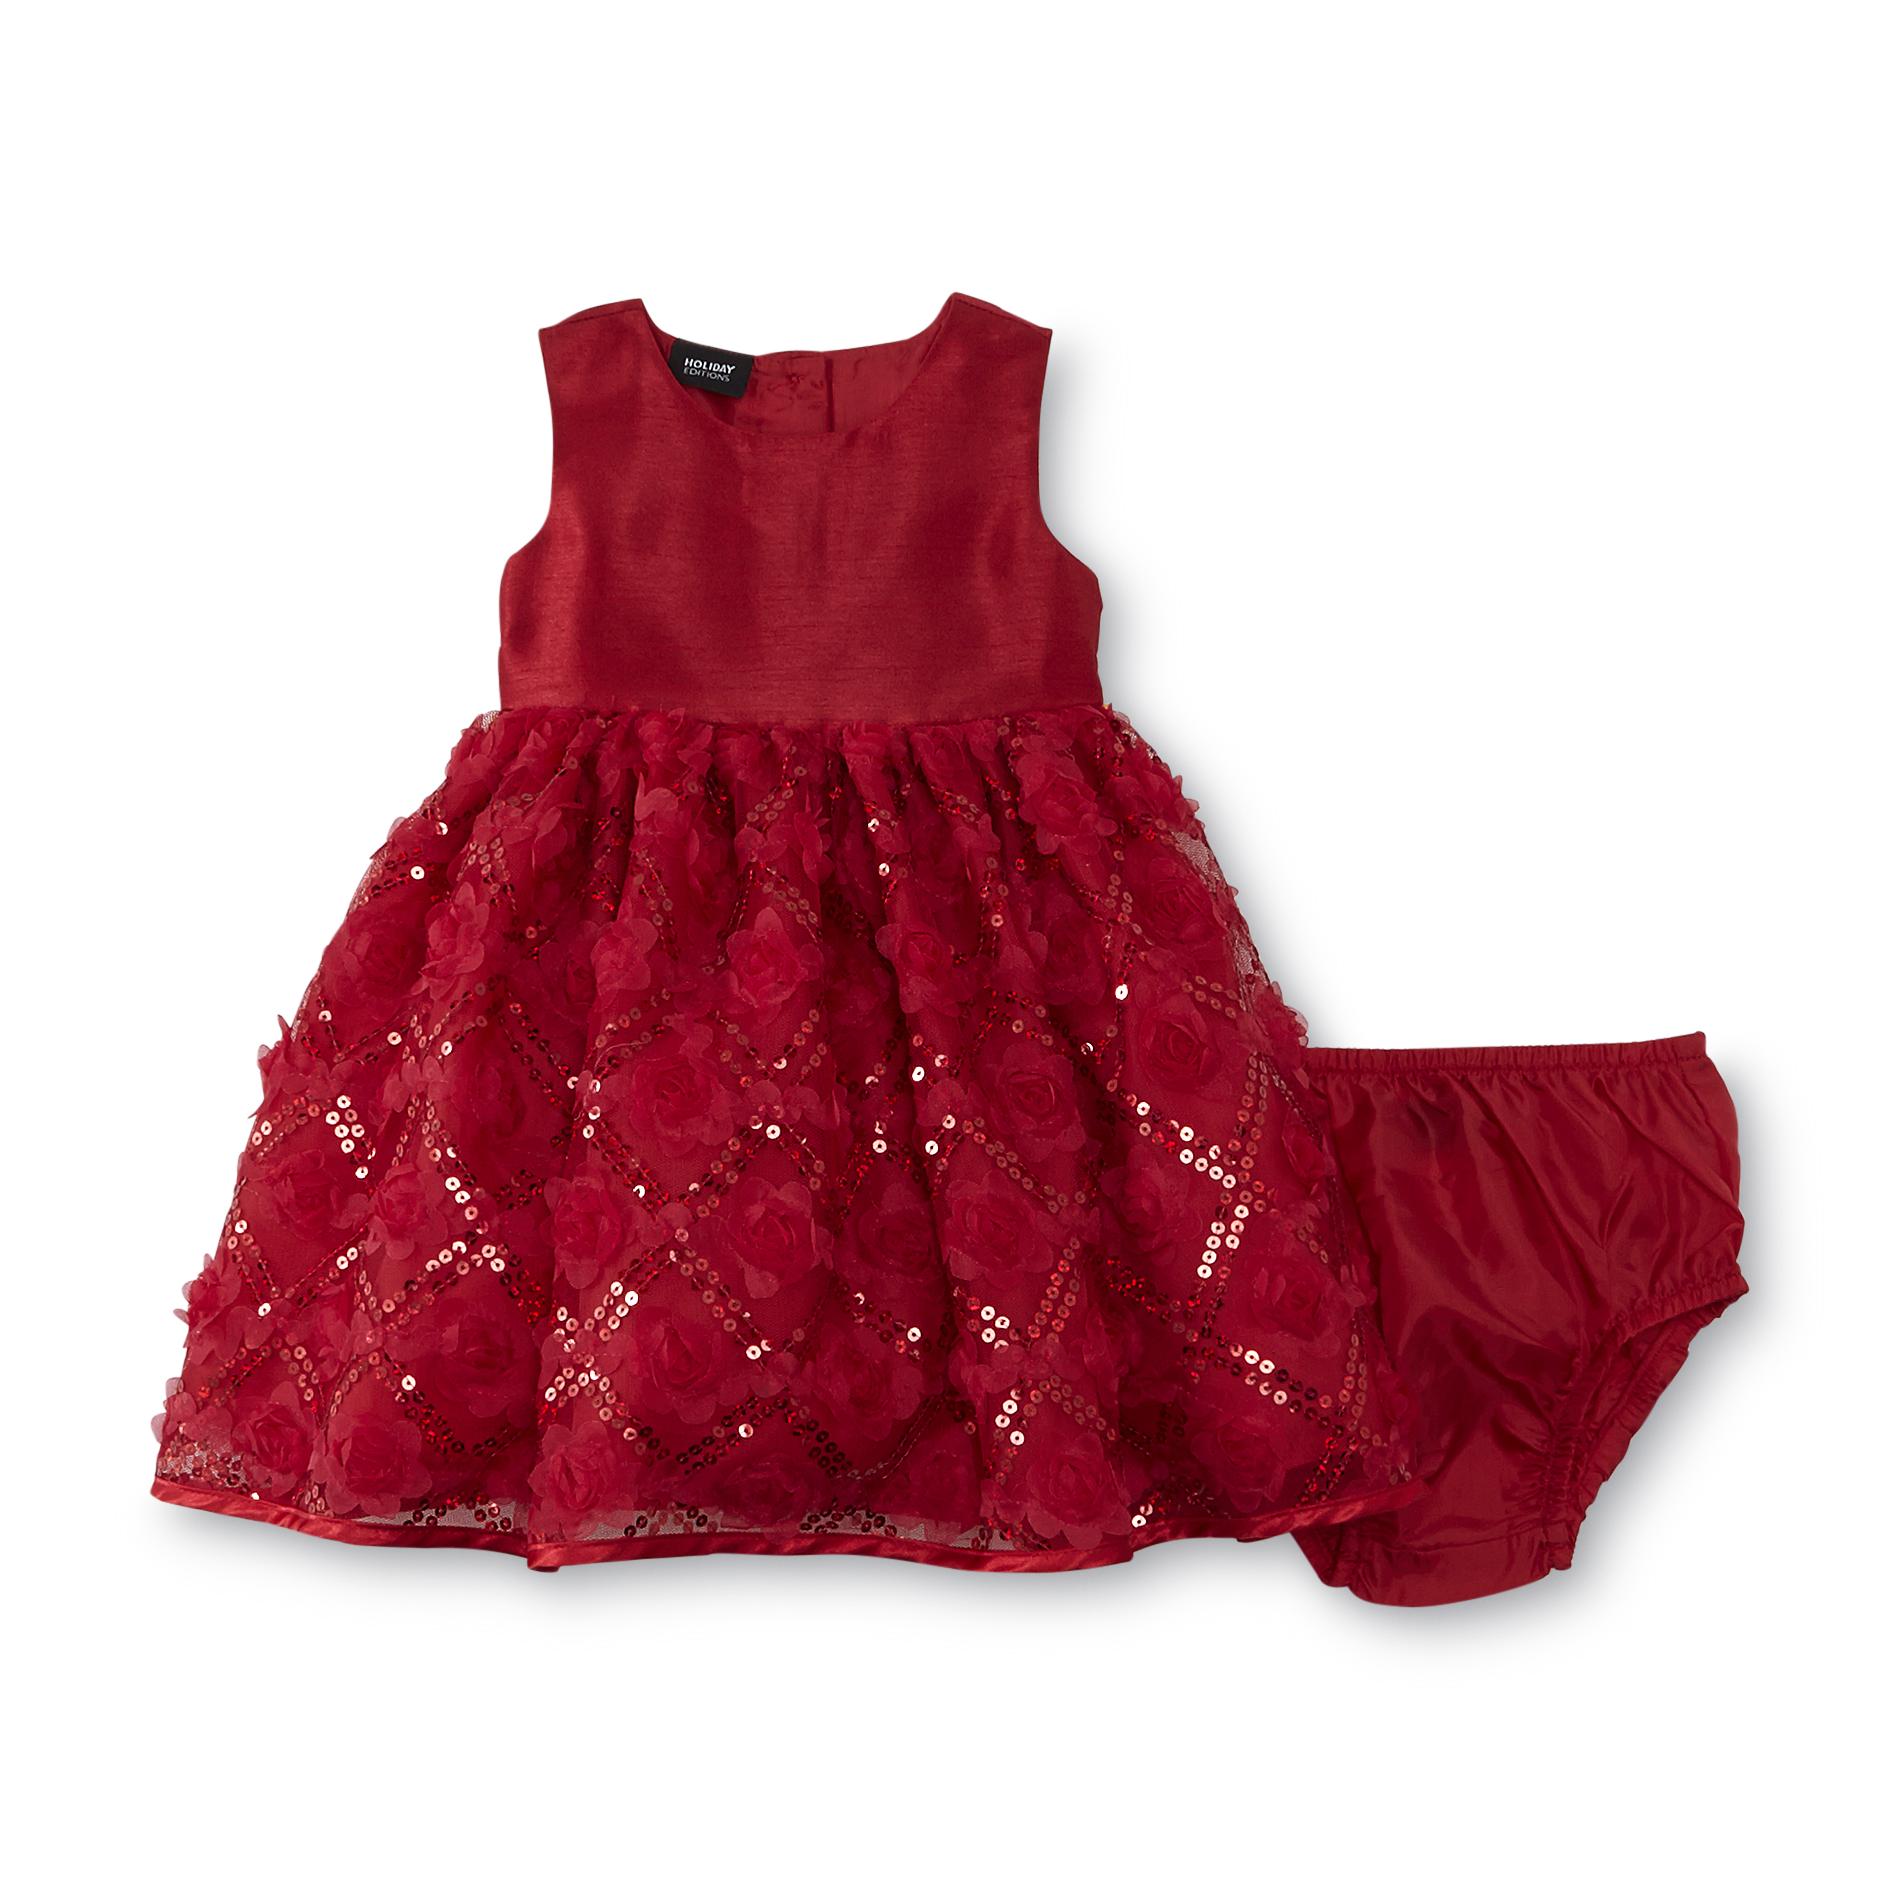 Holiday Editions Infant & Toddler Girl's Sleeveless Sequin Party Dress